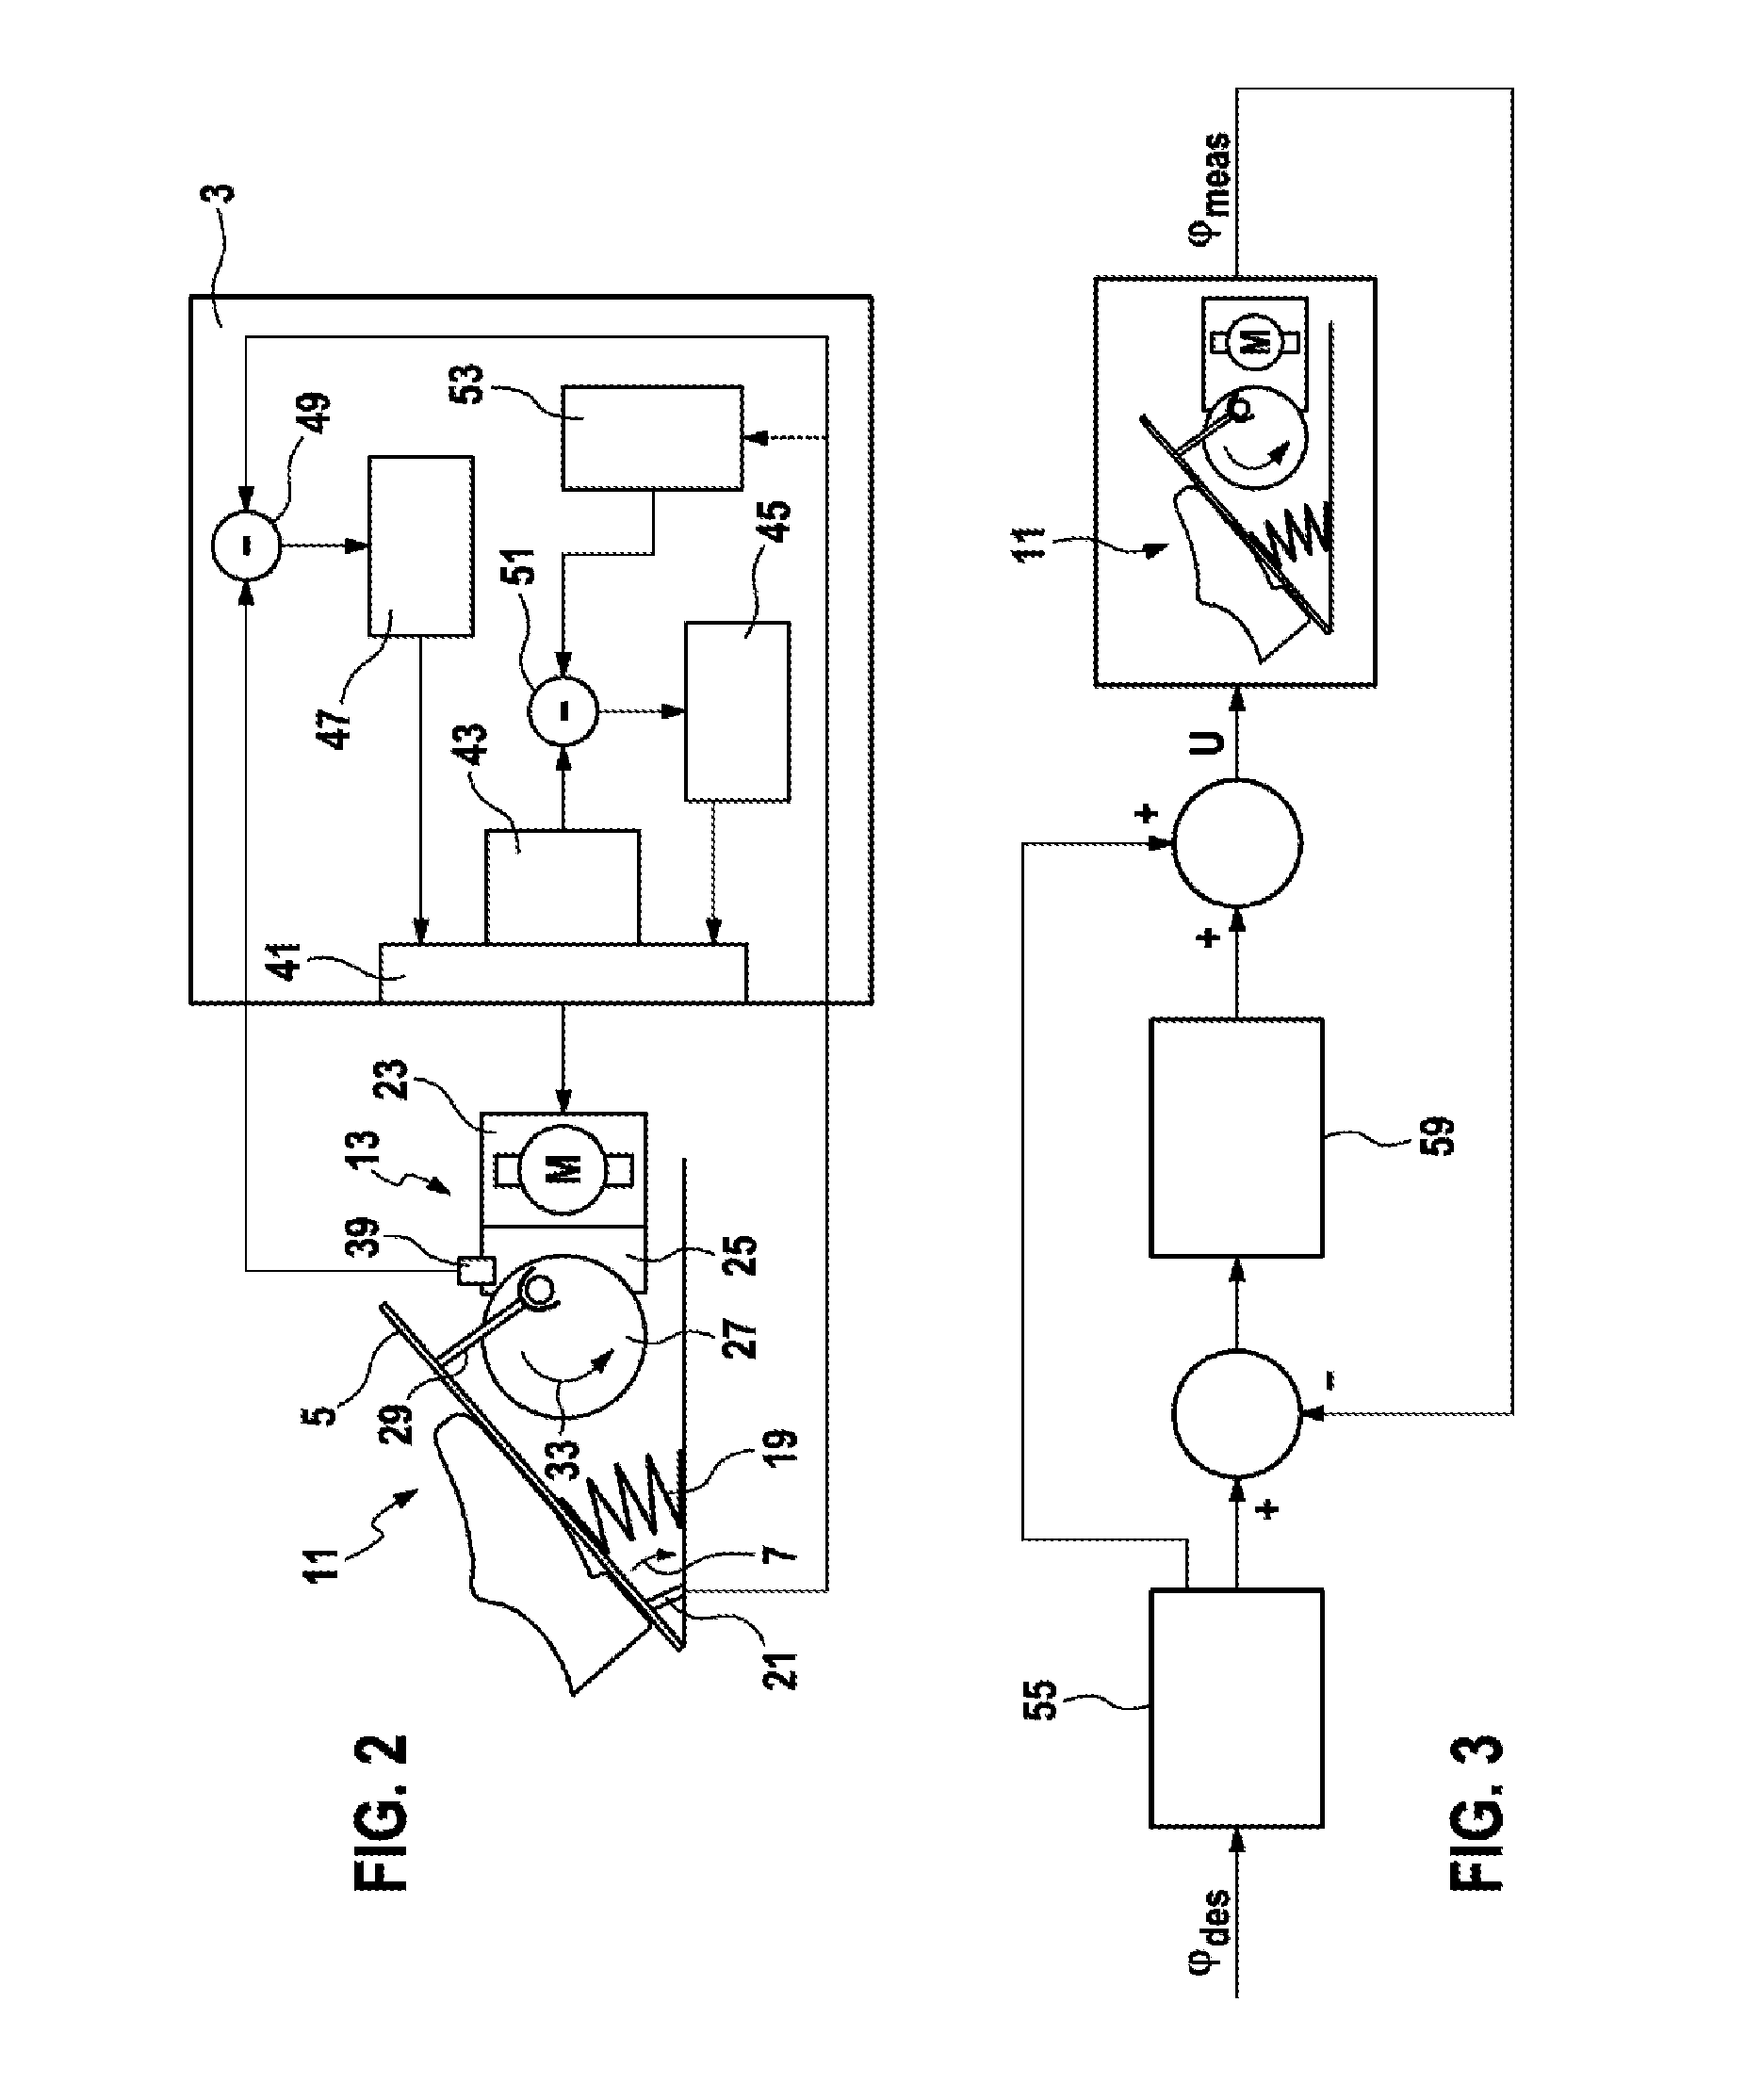 Method and control device for controlling a haptic accelerator pedal of a motor vehicle by means of a position control